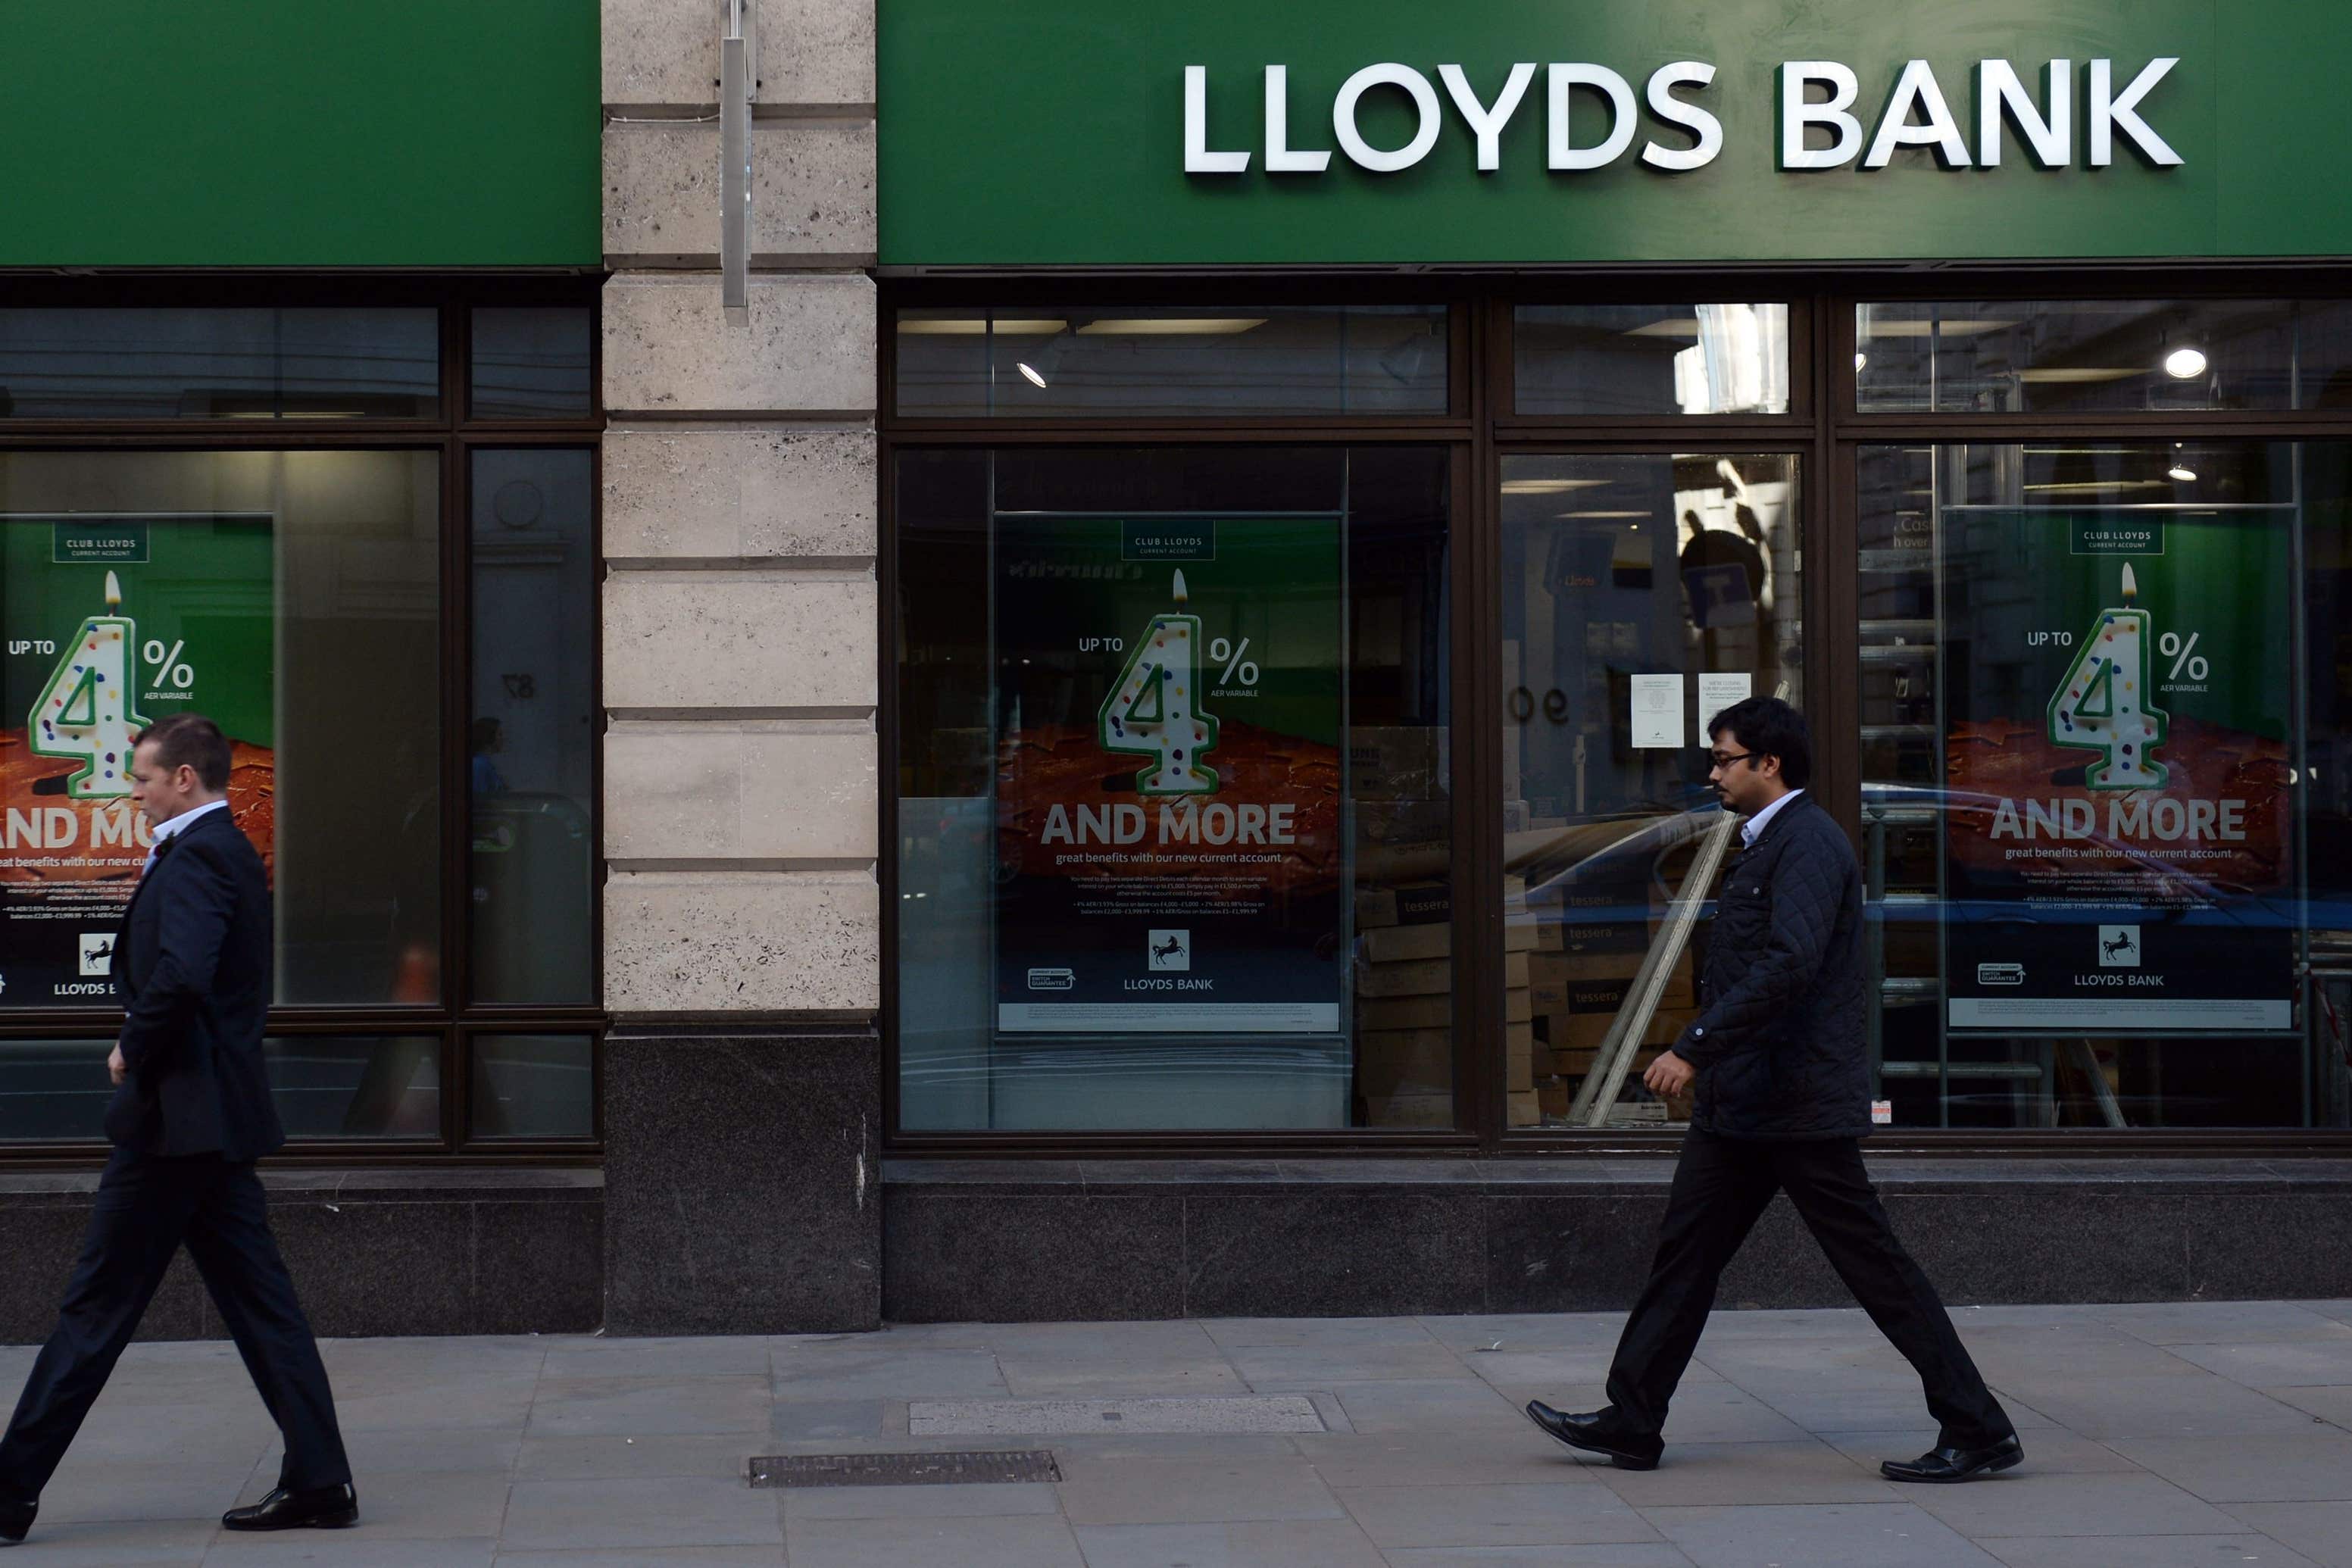 Only 8% of Lloyds customers solely use physical banks to manage their money